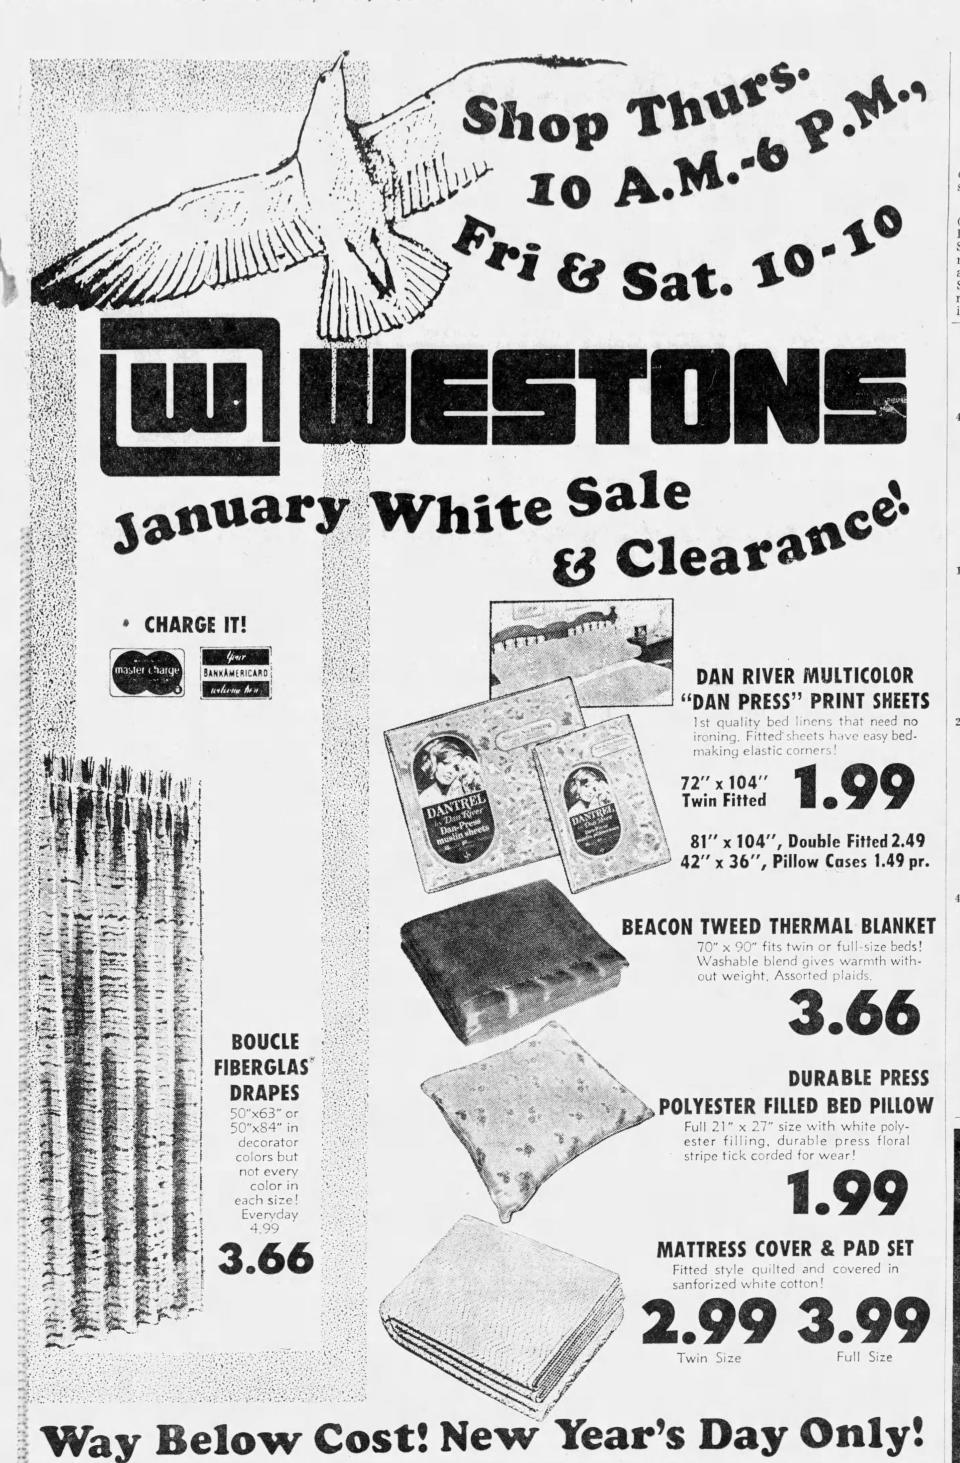 Some stores, like Westons, were open on New Year's Day in 1969.